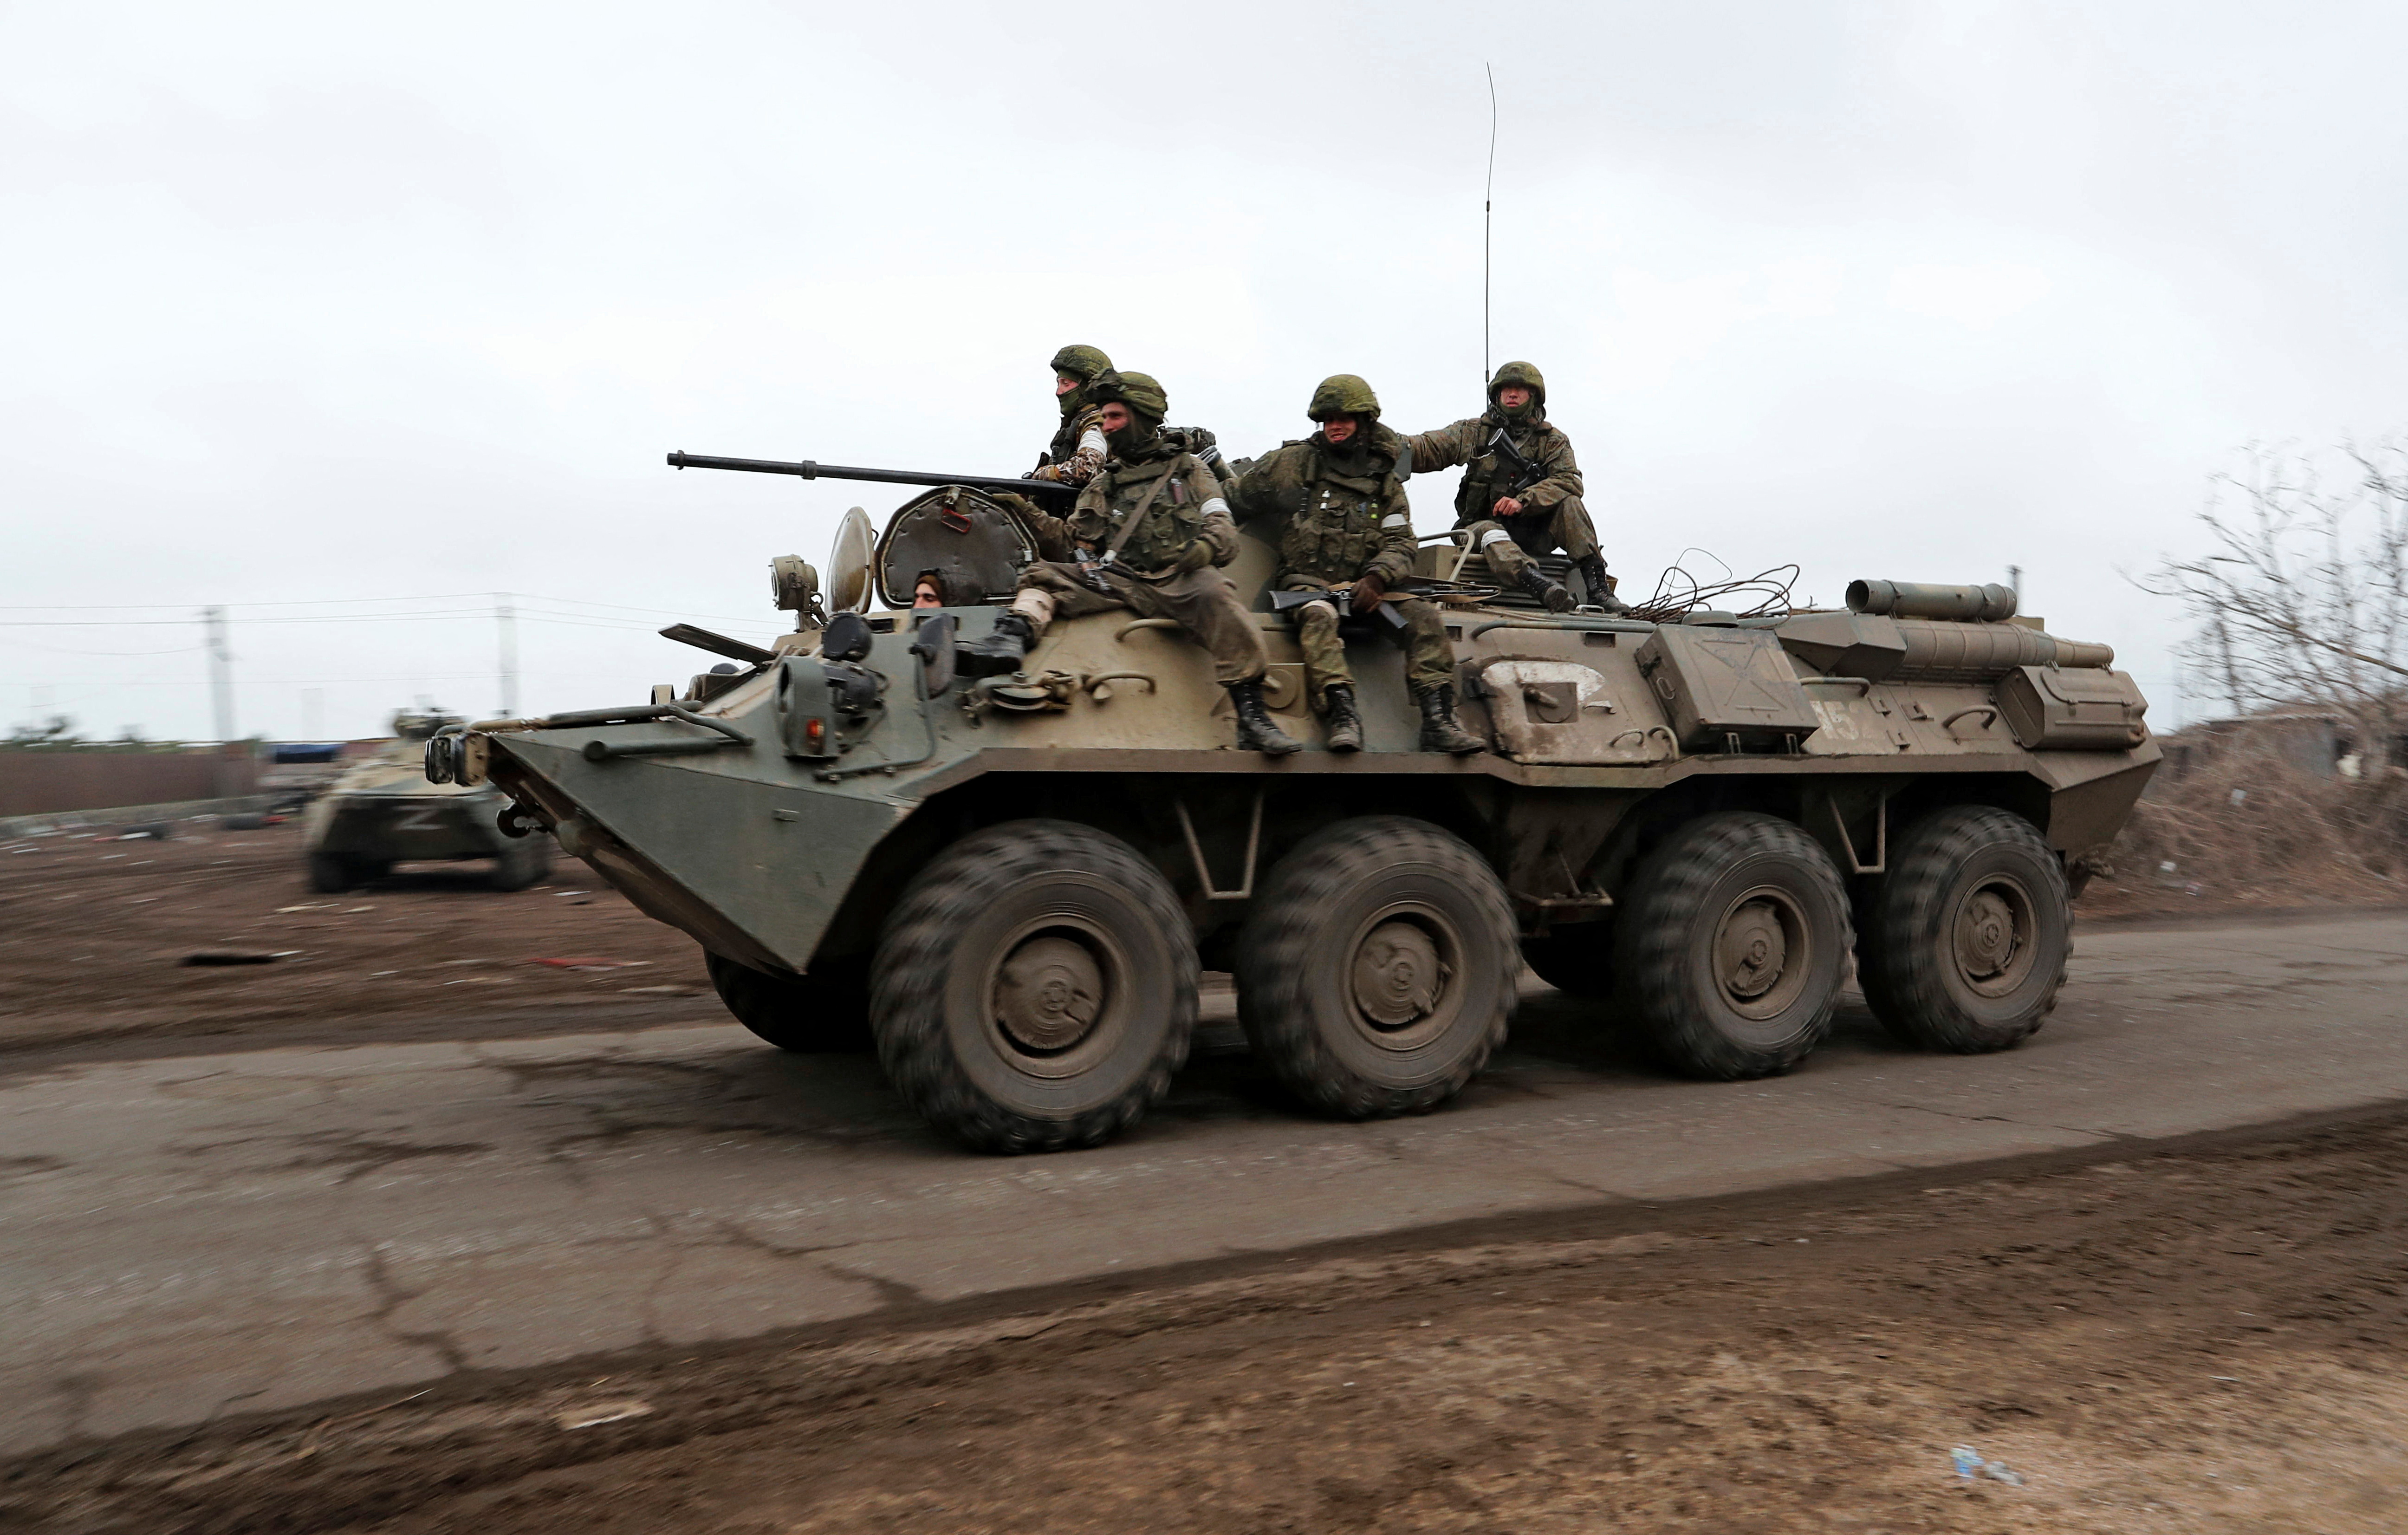 Service members of pro-Russian troops ride an armoured vehicle in Mariupol